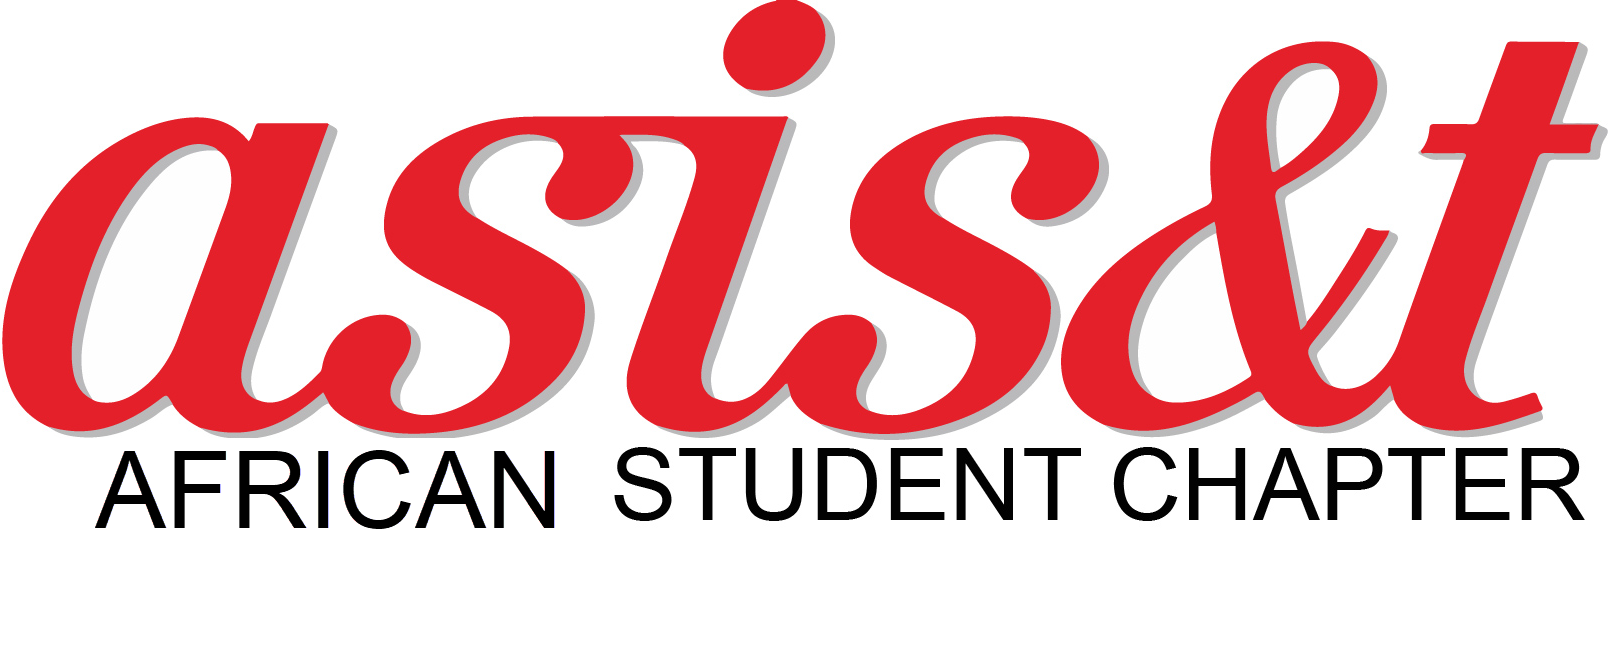 African Student Chapter Logo